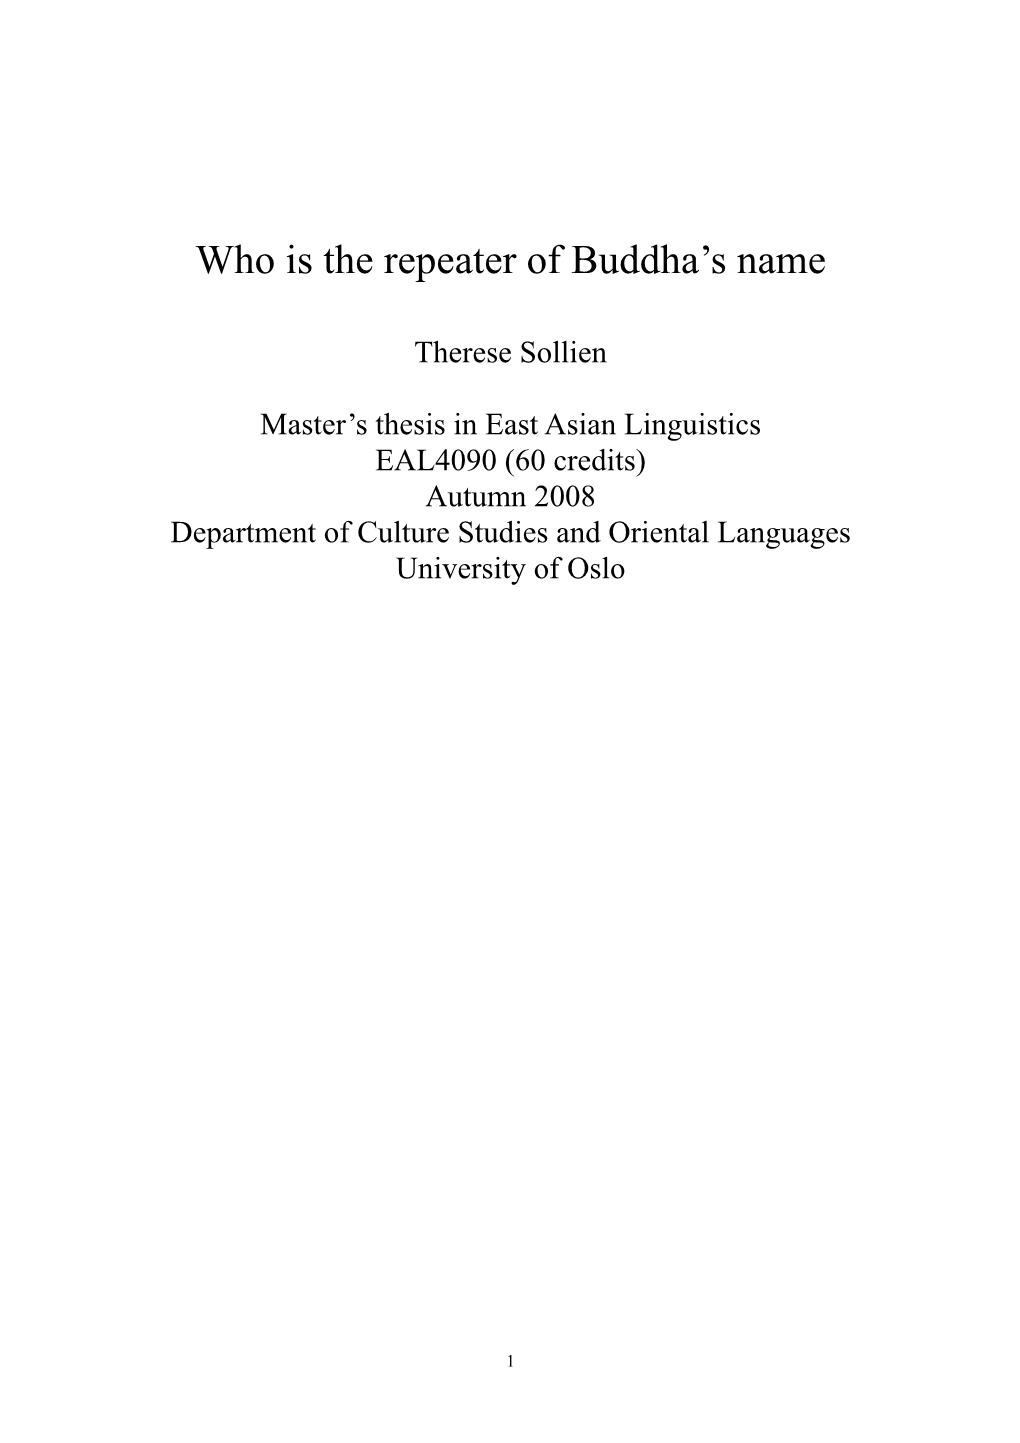 Who Is the Repeater of Buddha's Name